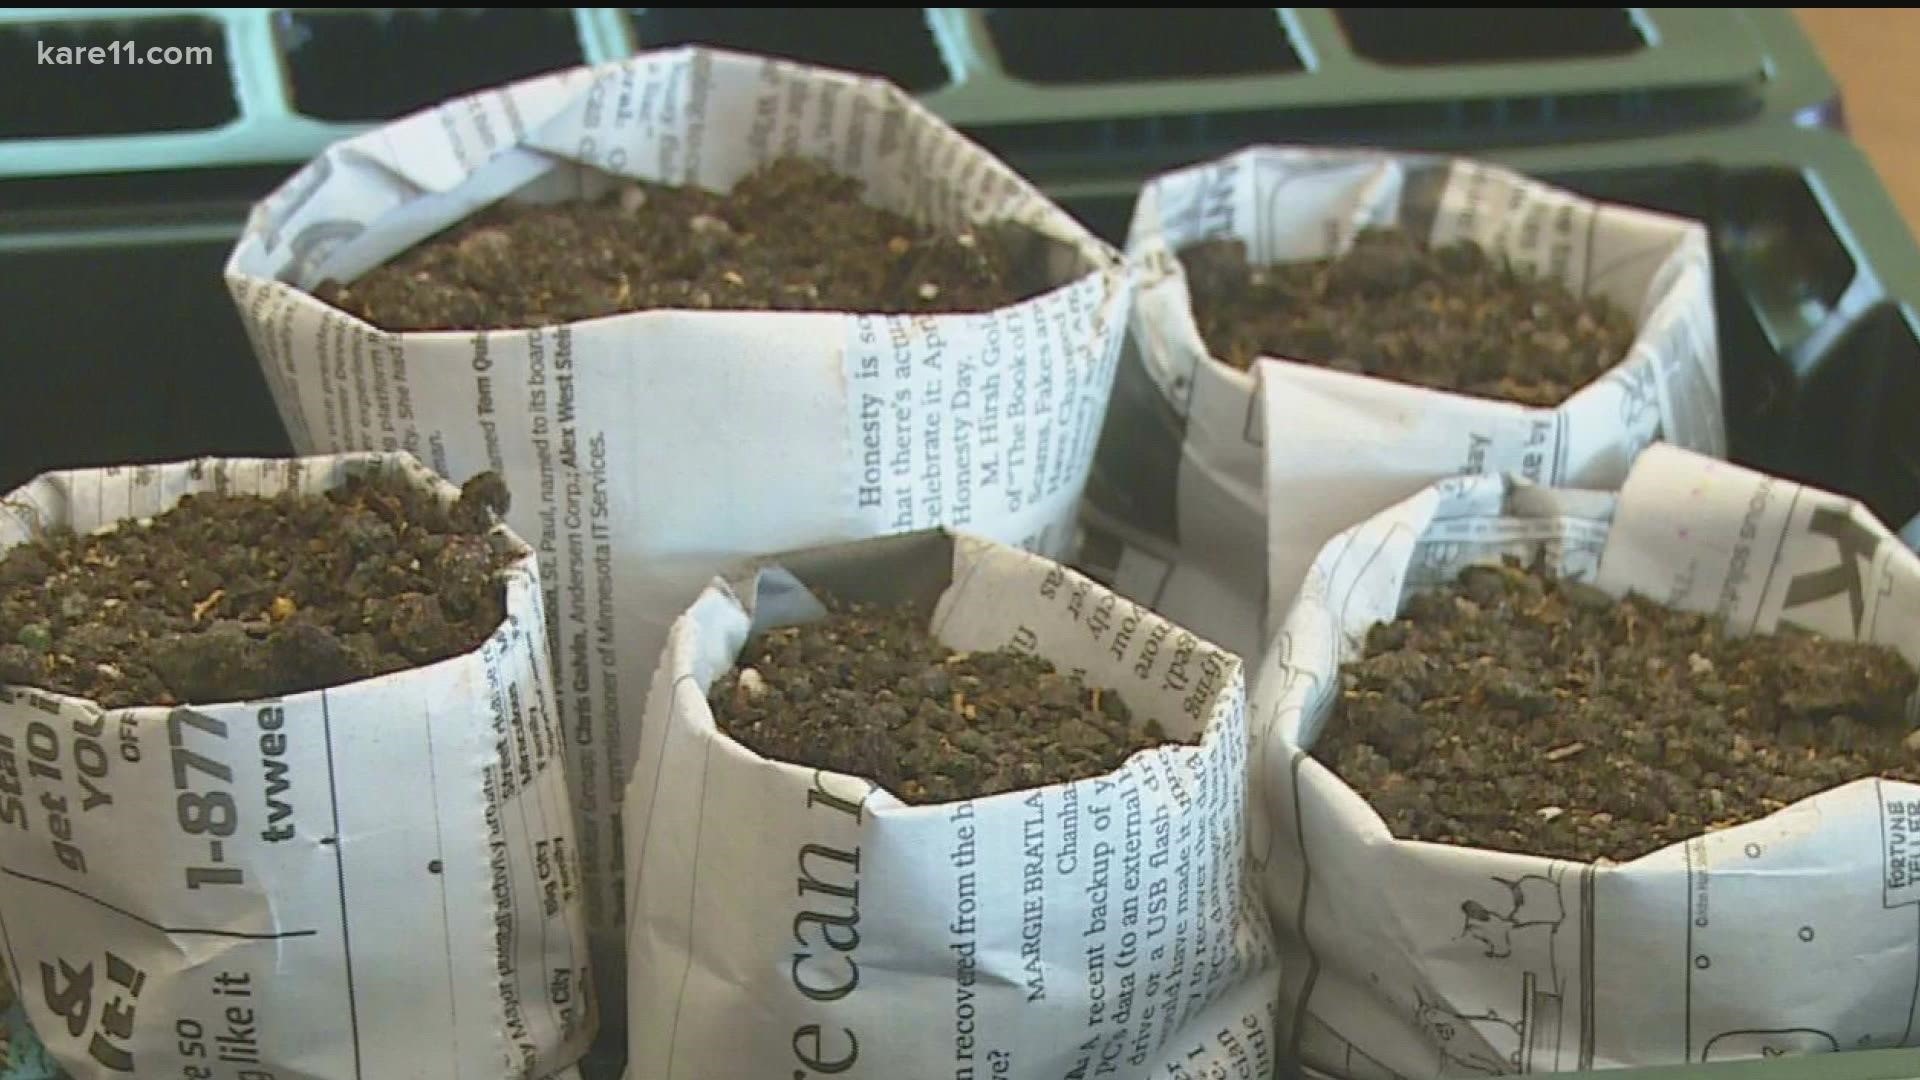 No need to buy the black plastic trays for seed starting — make your own from newspaper!